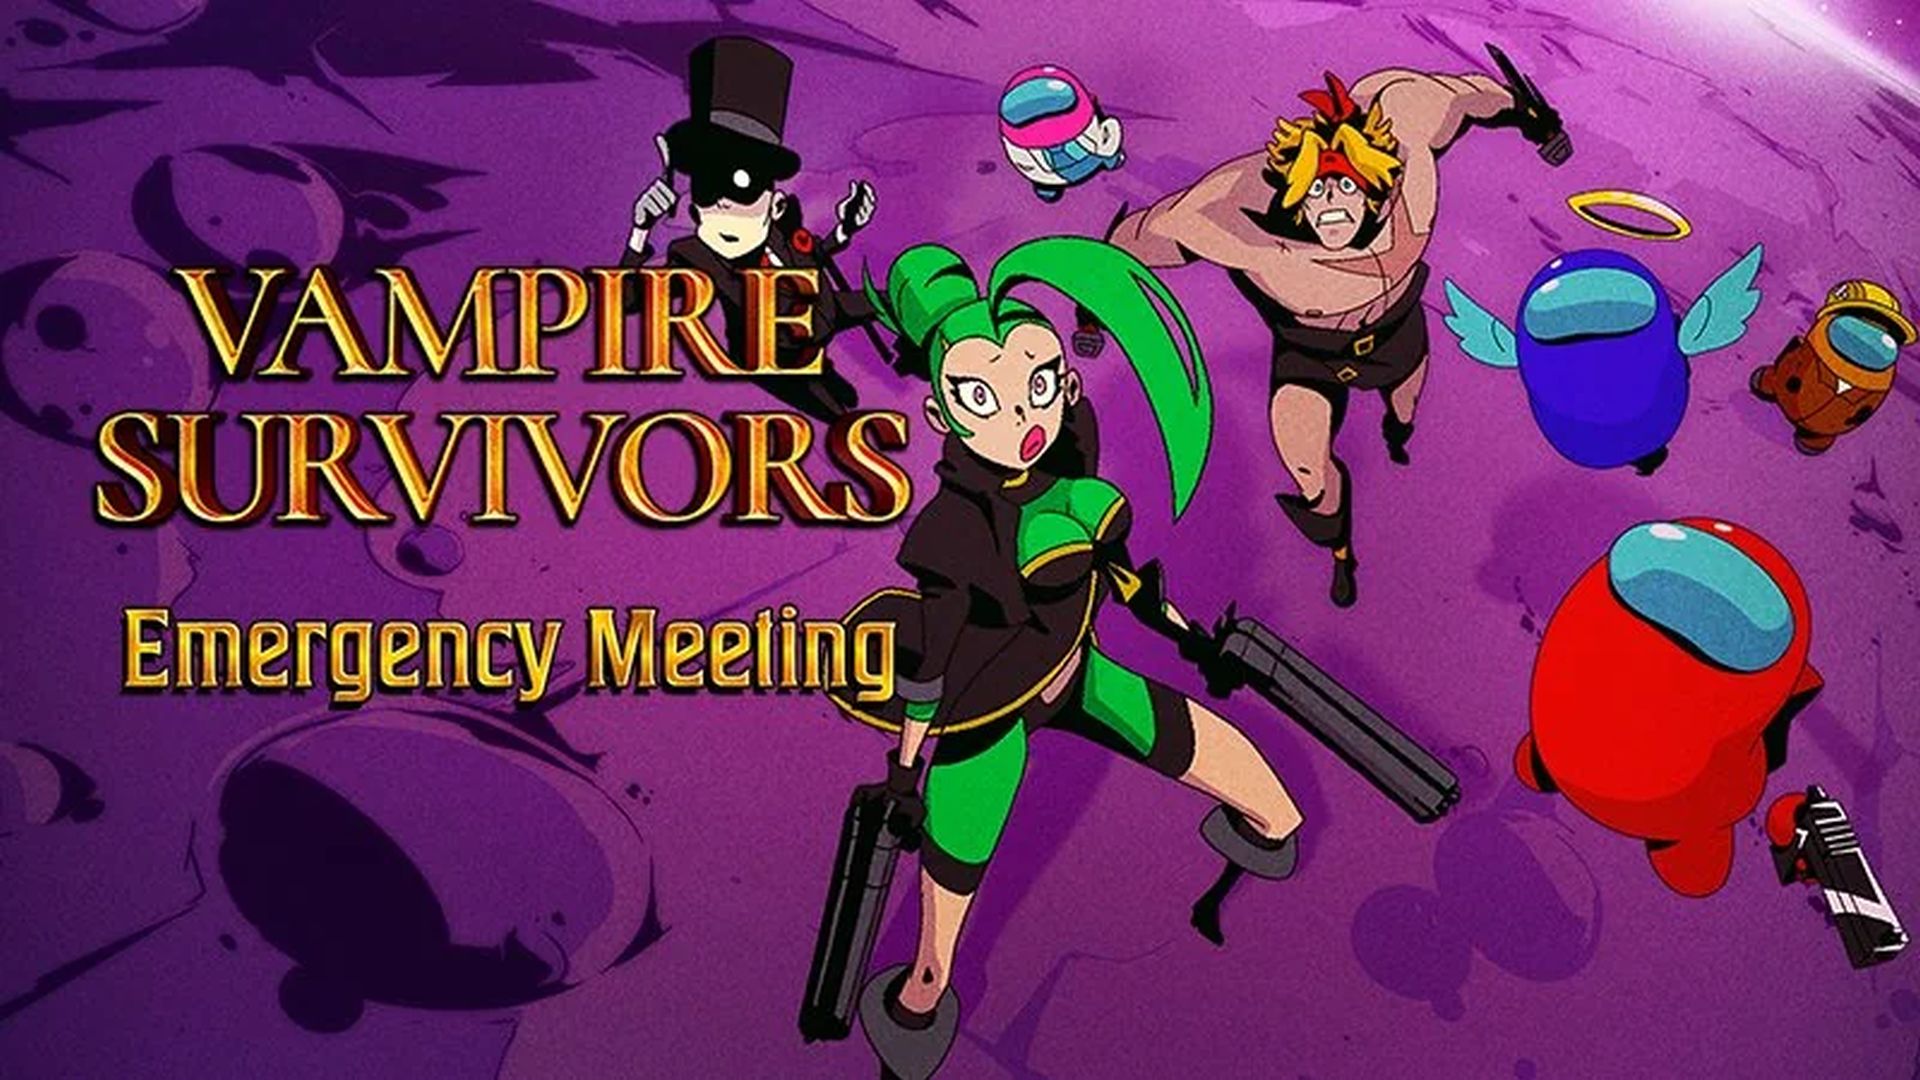 Vampire Survivors Unveils Among Us Collaboration DLC Emergency Meeting, Out on December 18